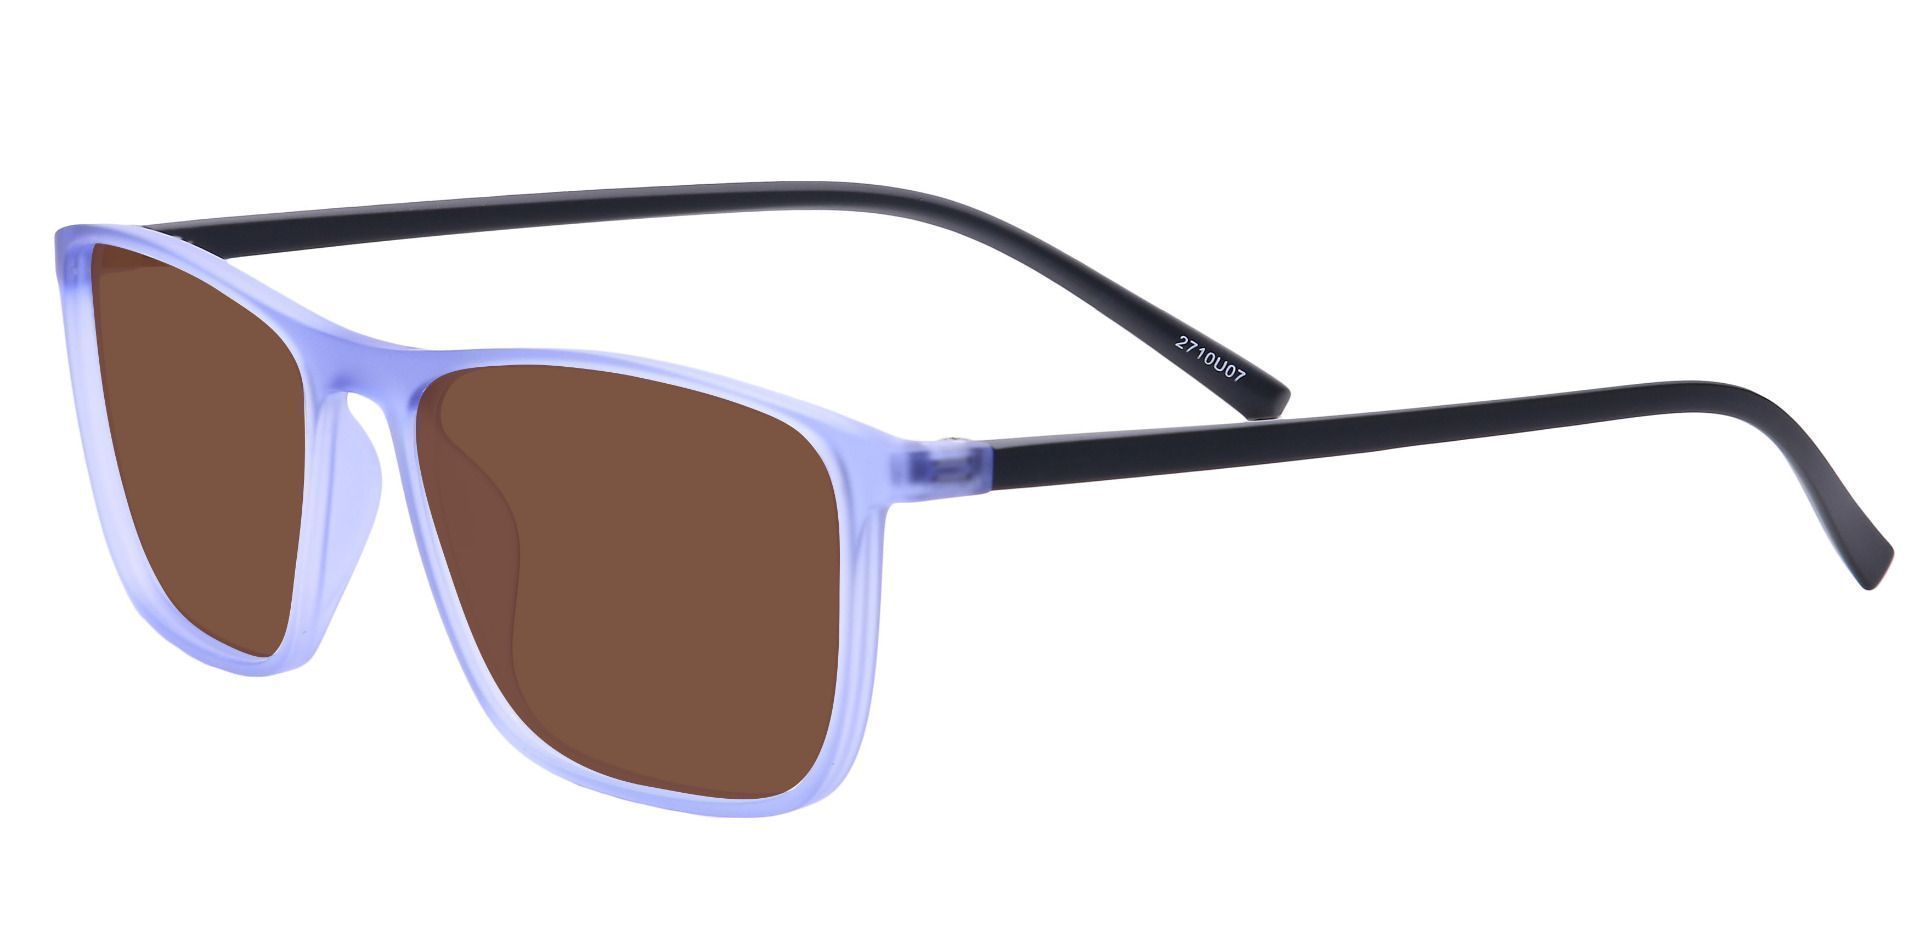 Candid Rectangle Prescription Sunglasses - Blue Frame With Brown Lenses